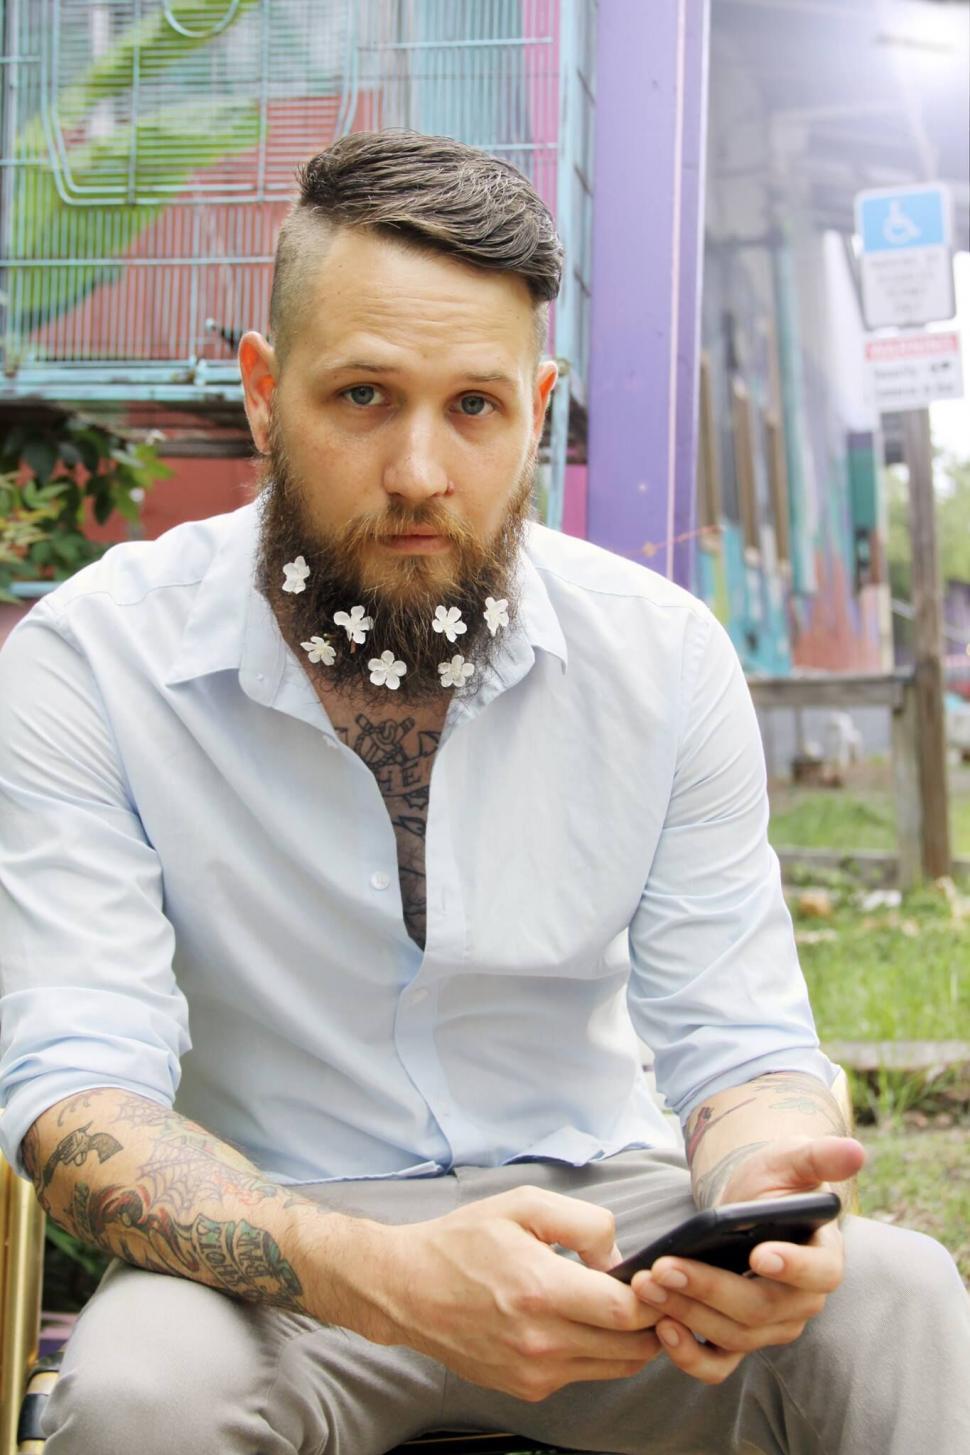 Free Image of Man with beard and flowers texting on phone 